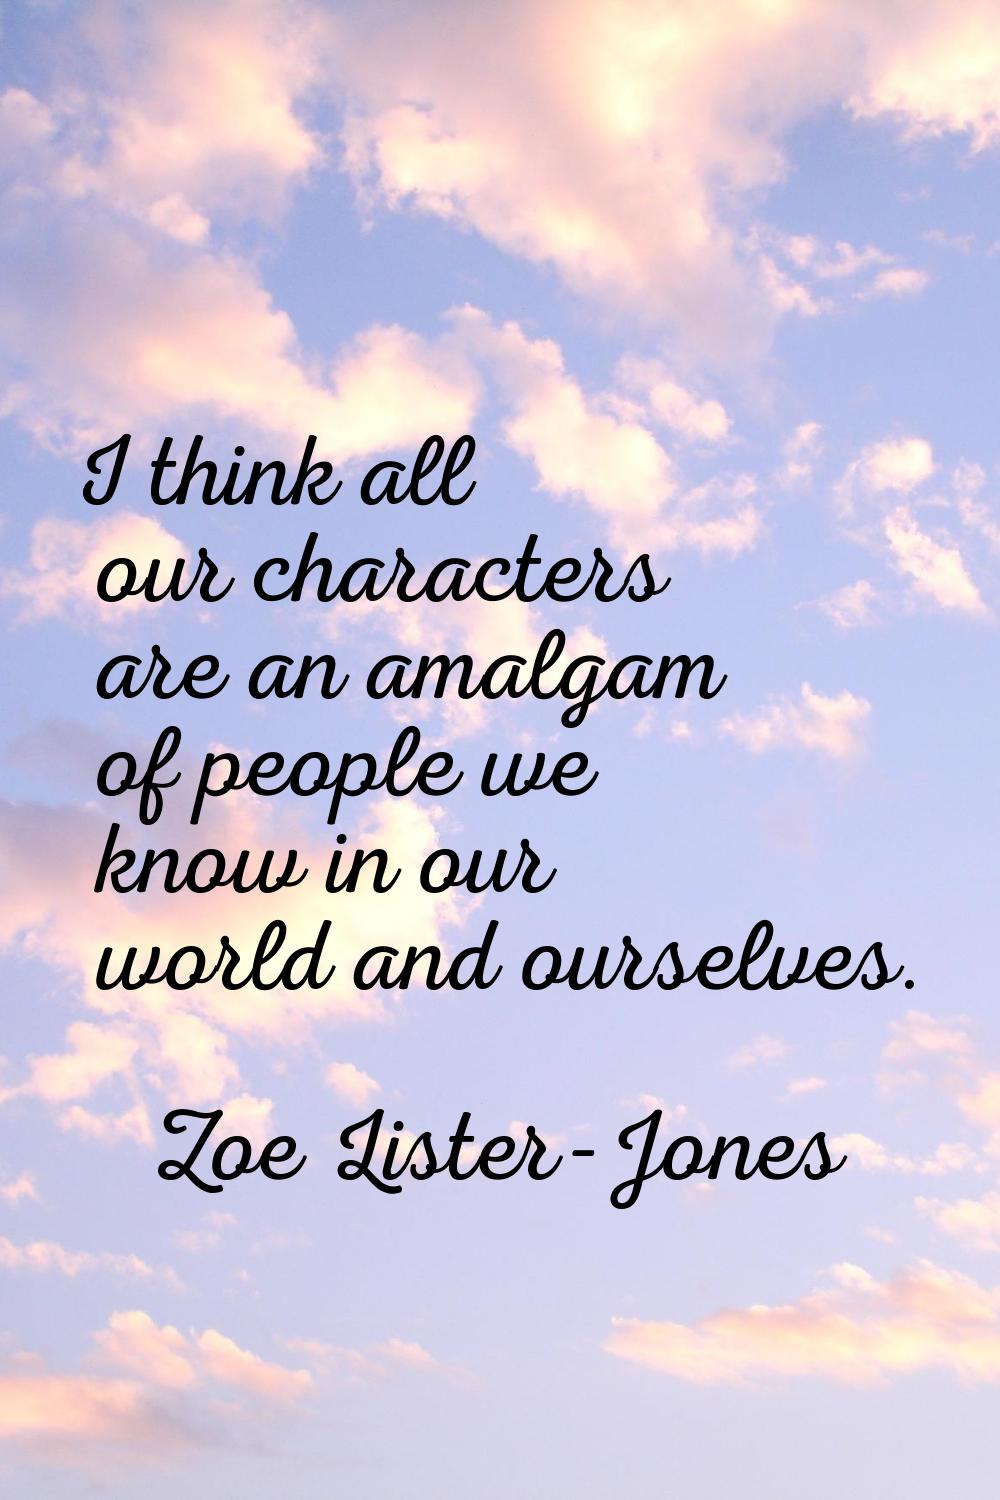 I think all our characters are an amalgam of people we know in our world and ourselves.